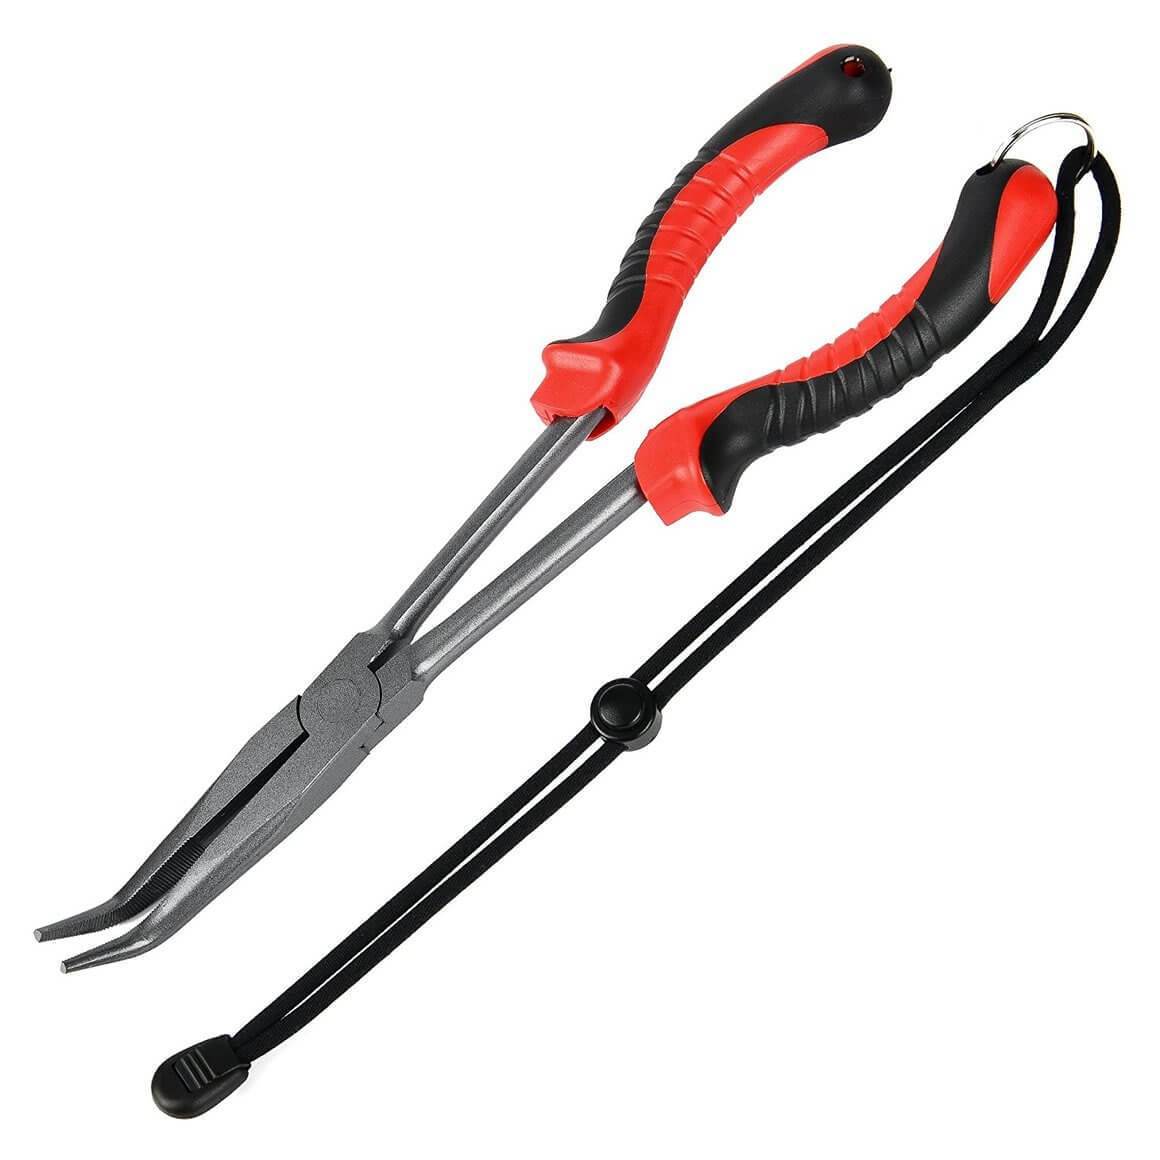 F05 Fisherman's Fishing Pliers – Booms Fishing Official